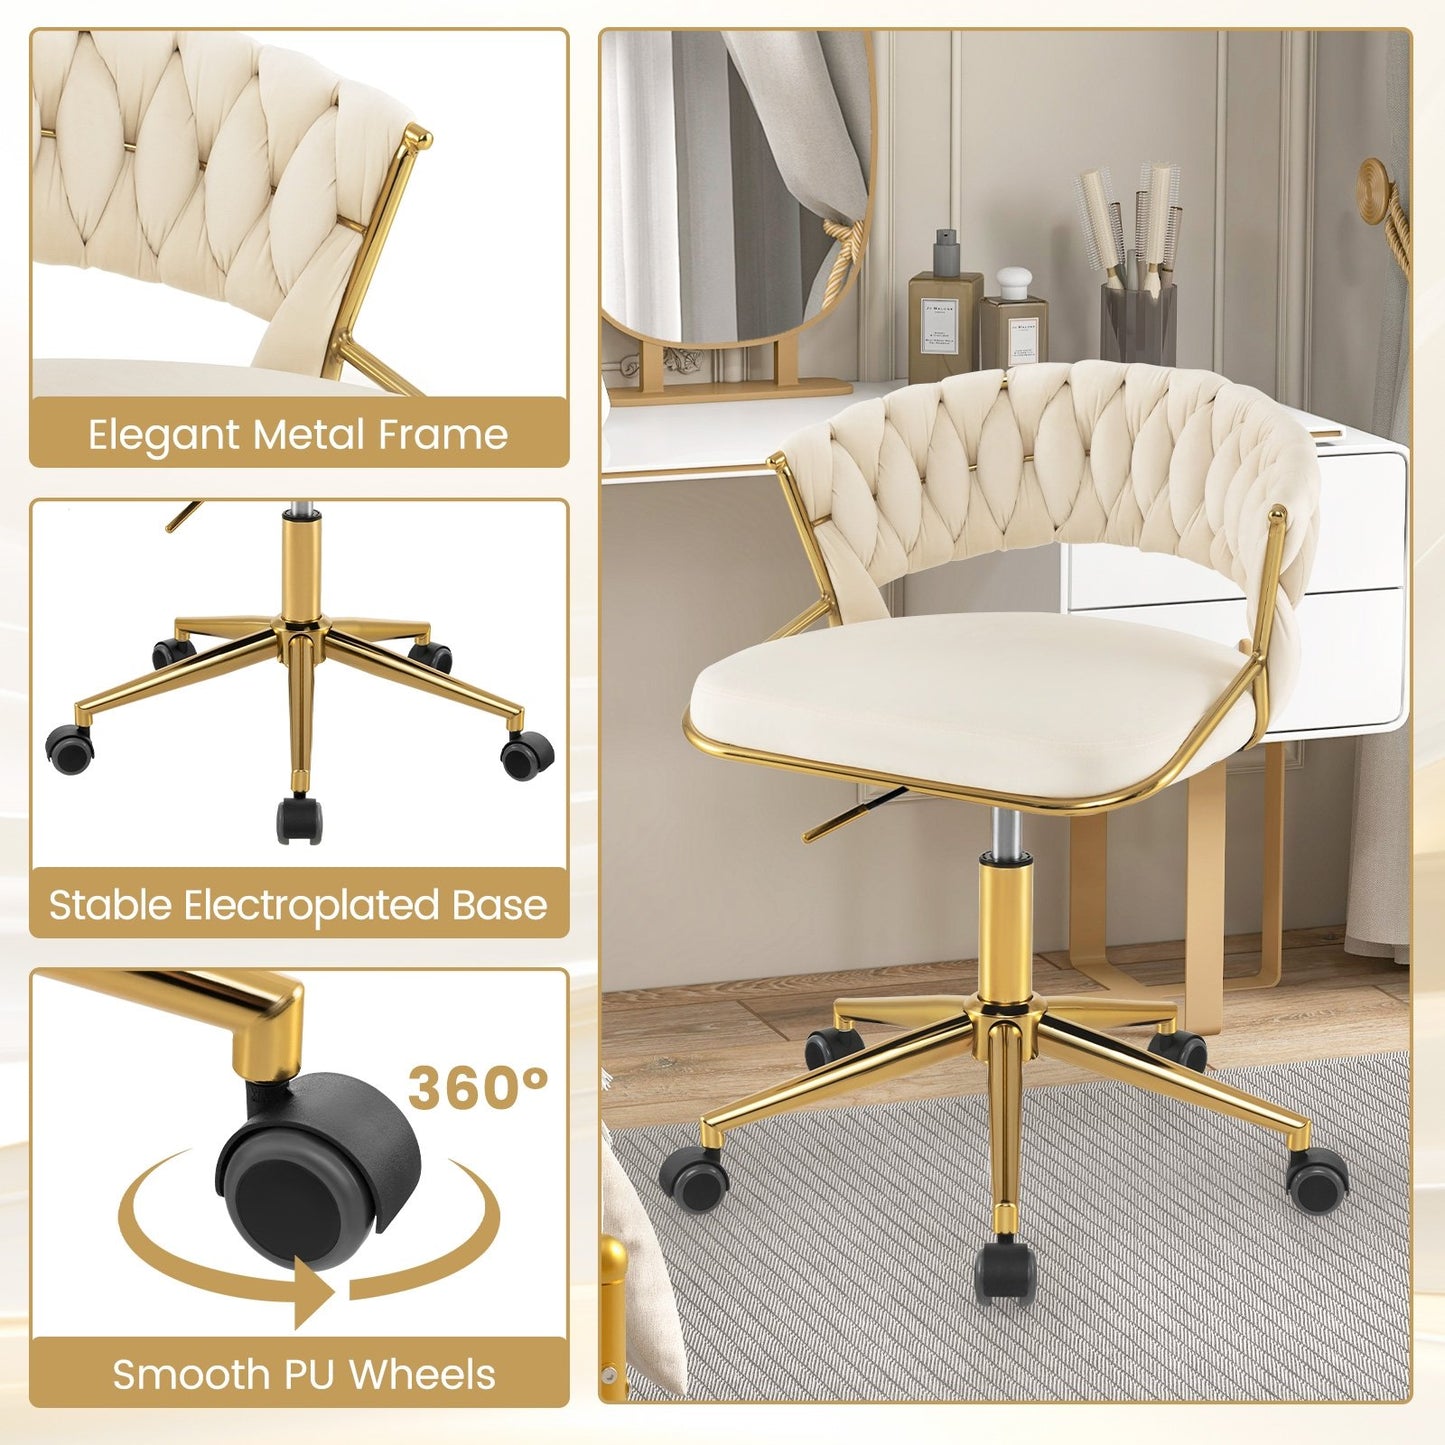 360° Height Adjustable Swivel Upholstered Desk Computer Chair with Hand-woven Back, Beige